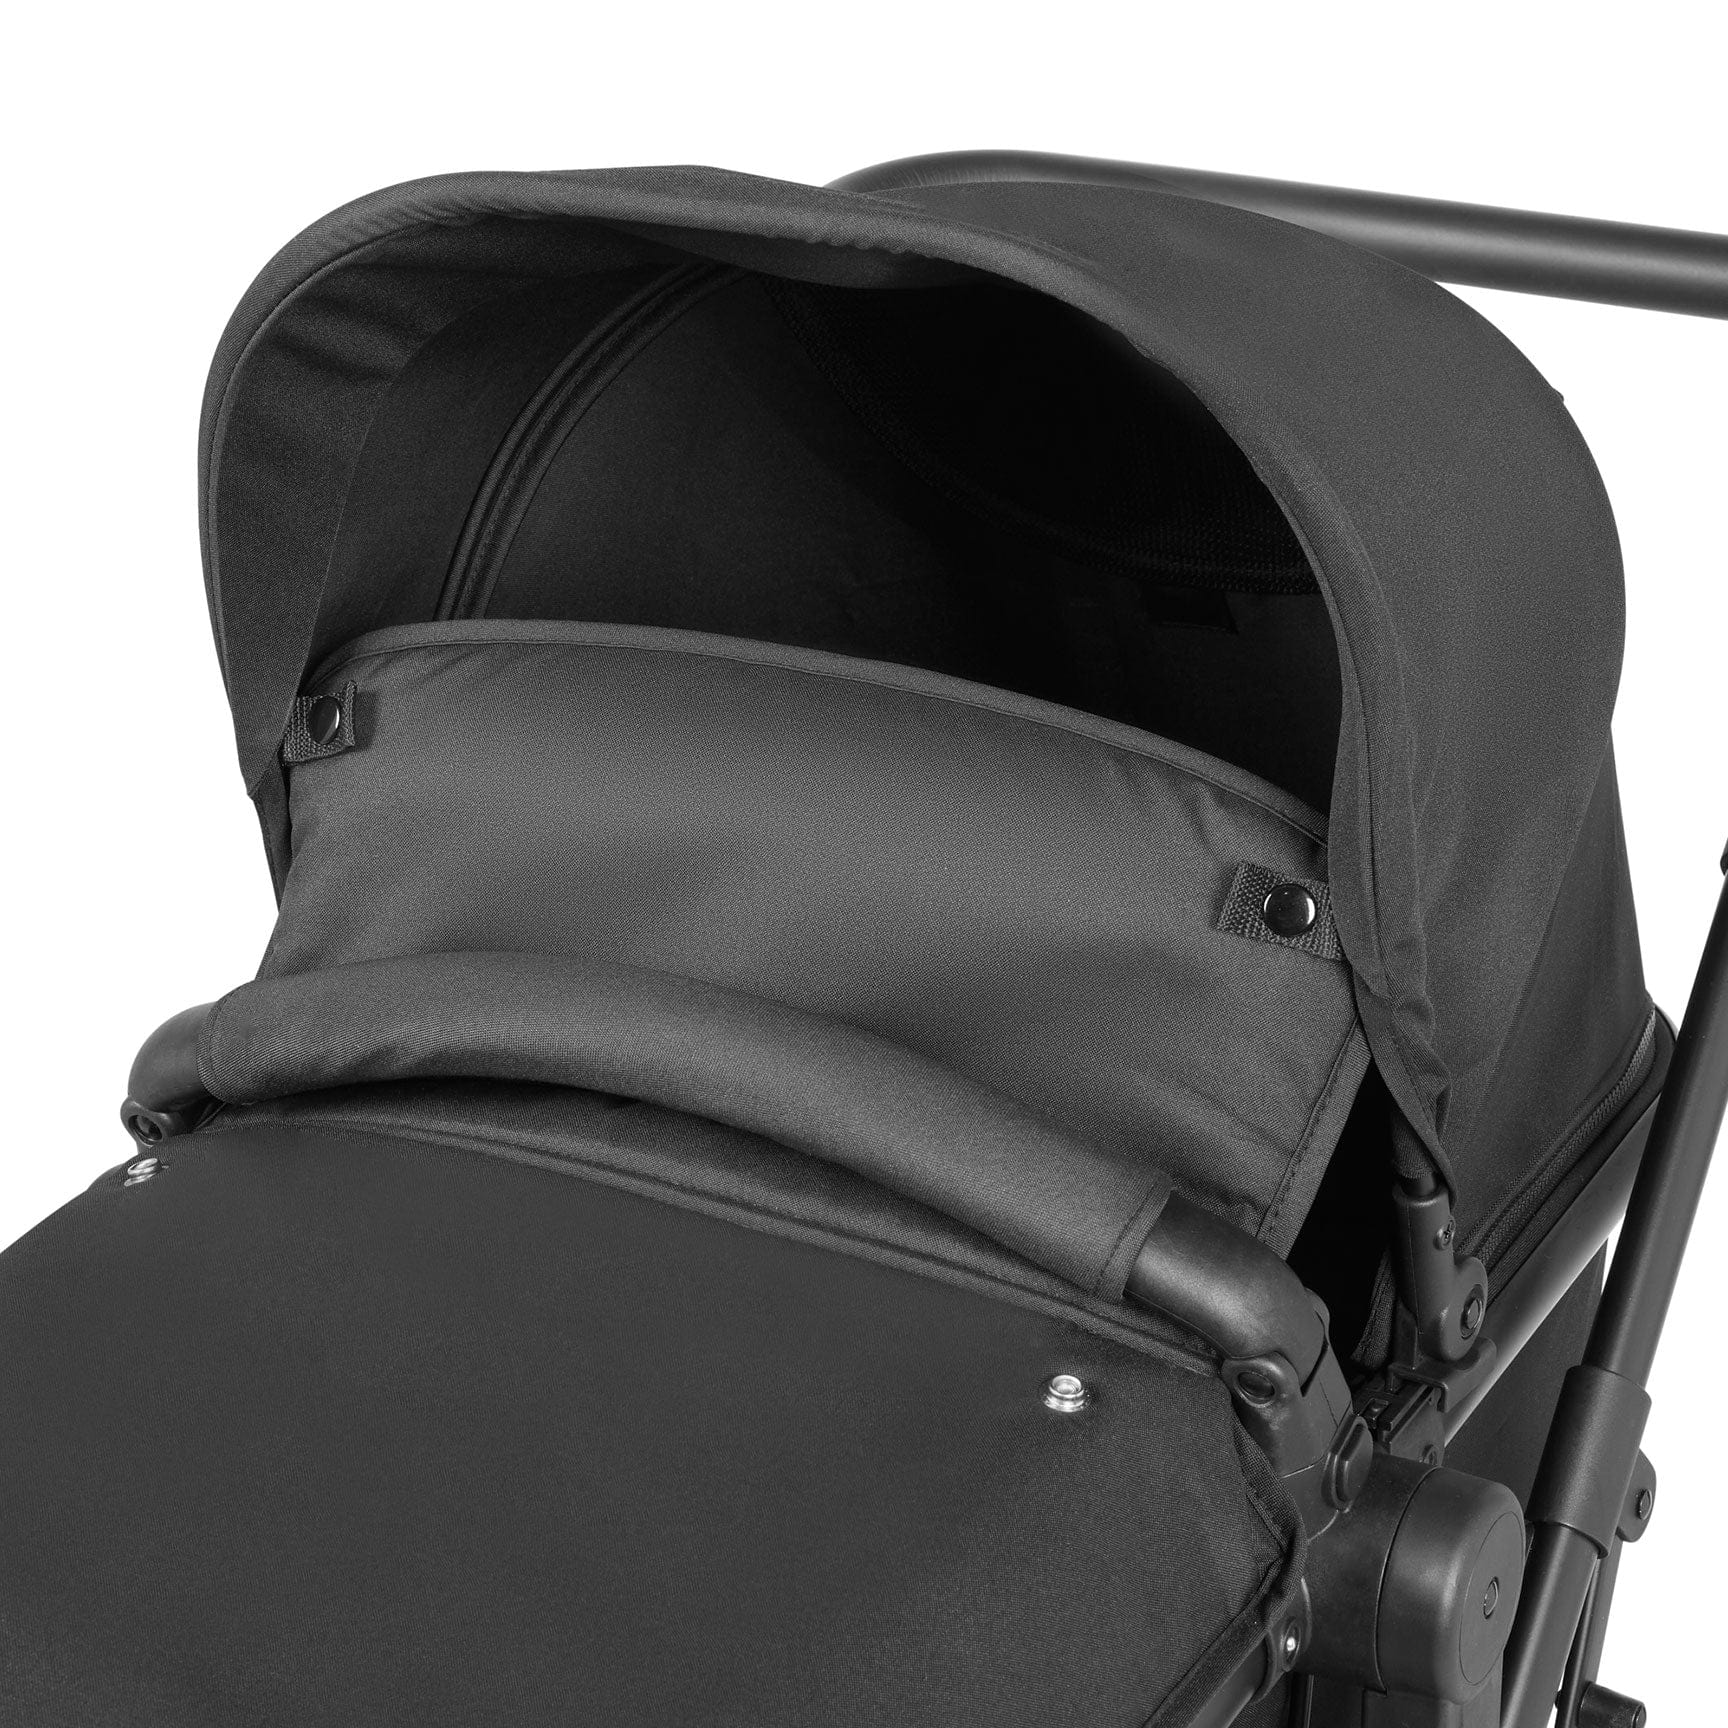 Ickle Bubba baby prams Ickle Bubba Comet 2-in-1 Plus Carrycot & Pushchair - Black 10-008-001-002